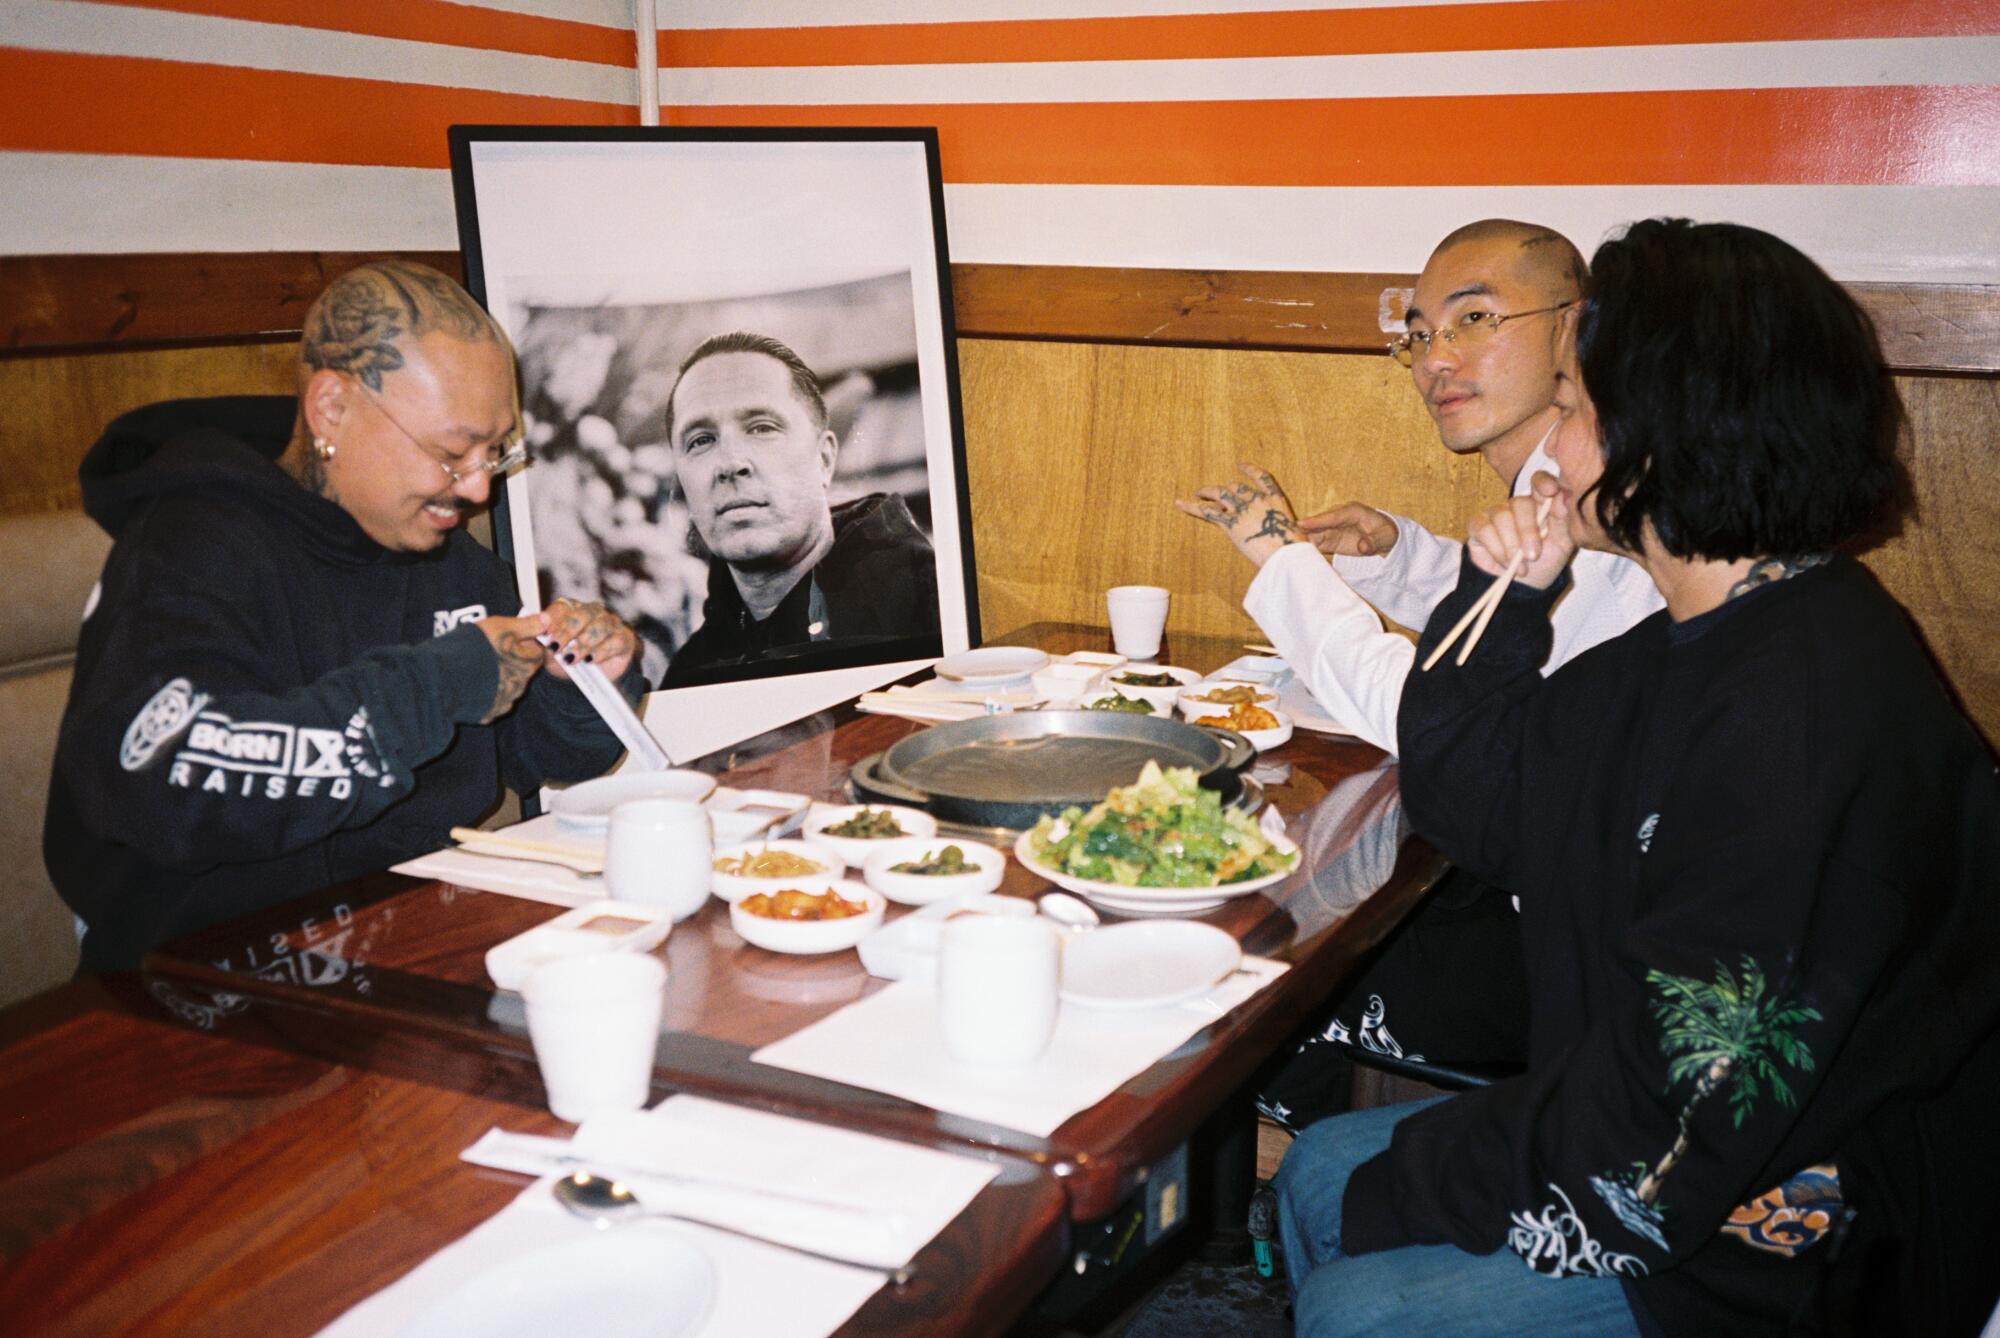 Three people sit and eat at a restaurant, with a black-and-white photo of a man propped up at the table.